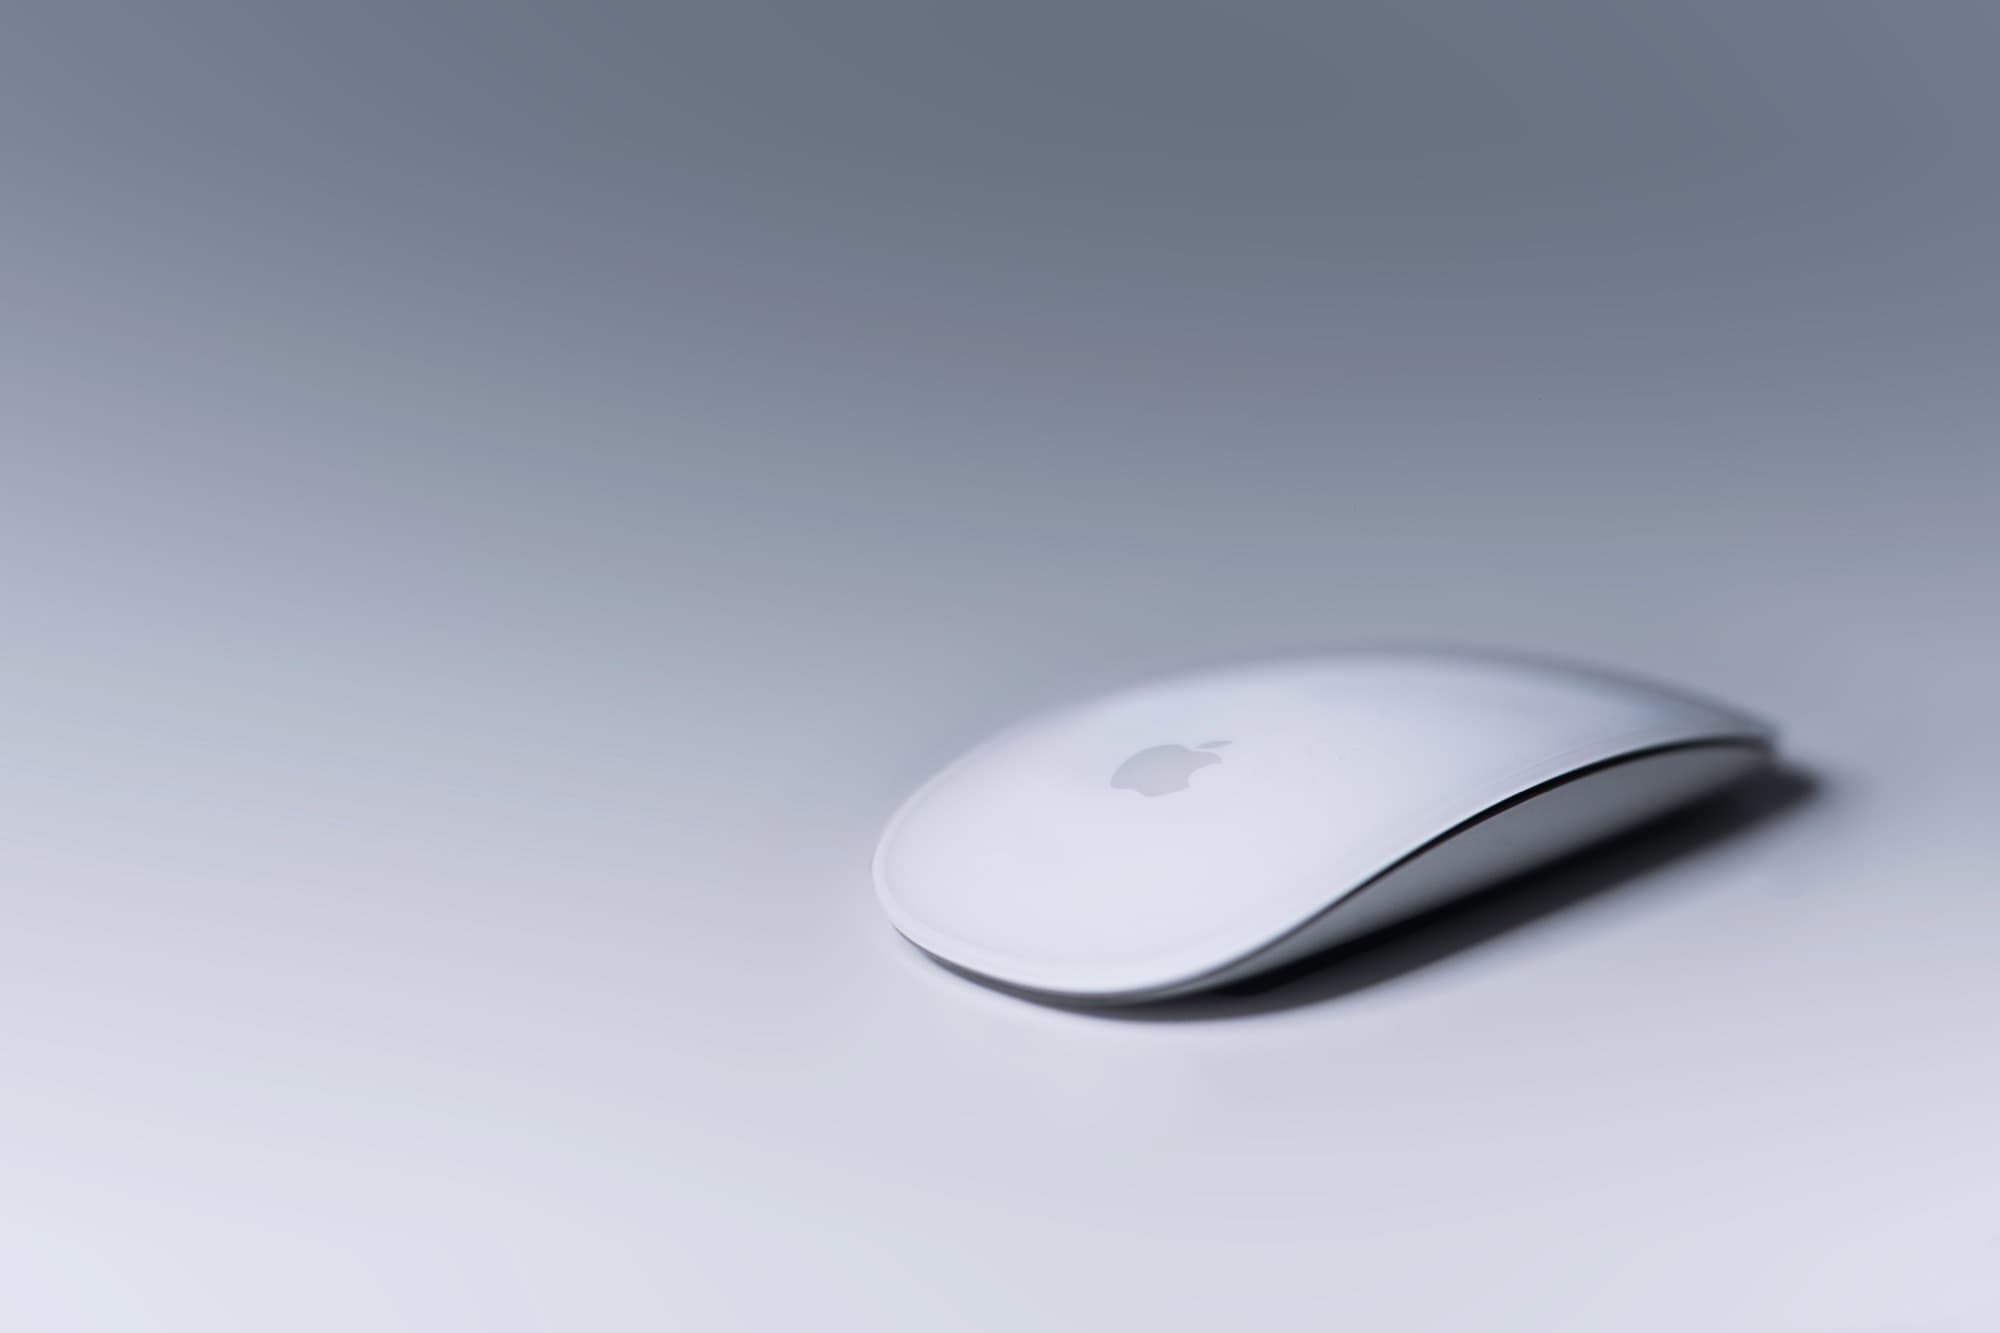 Fail: No USB-C update for Magic Mouse or Keyboard